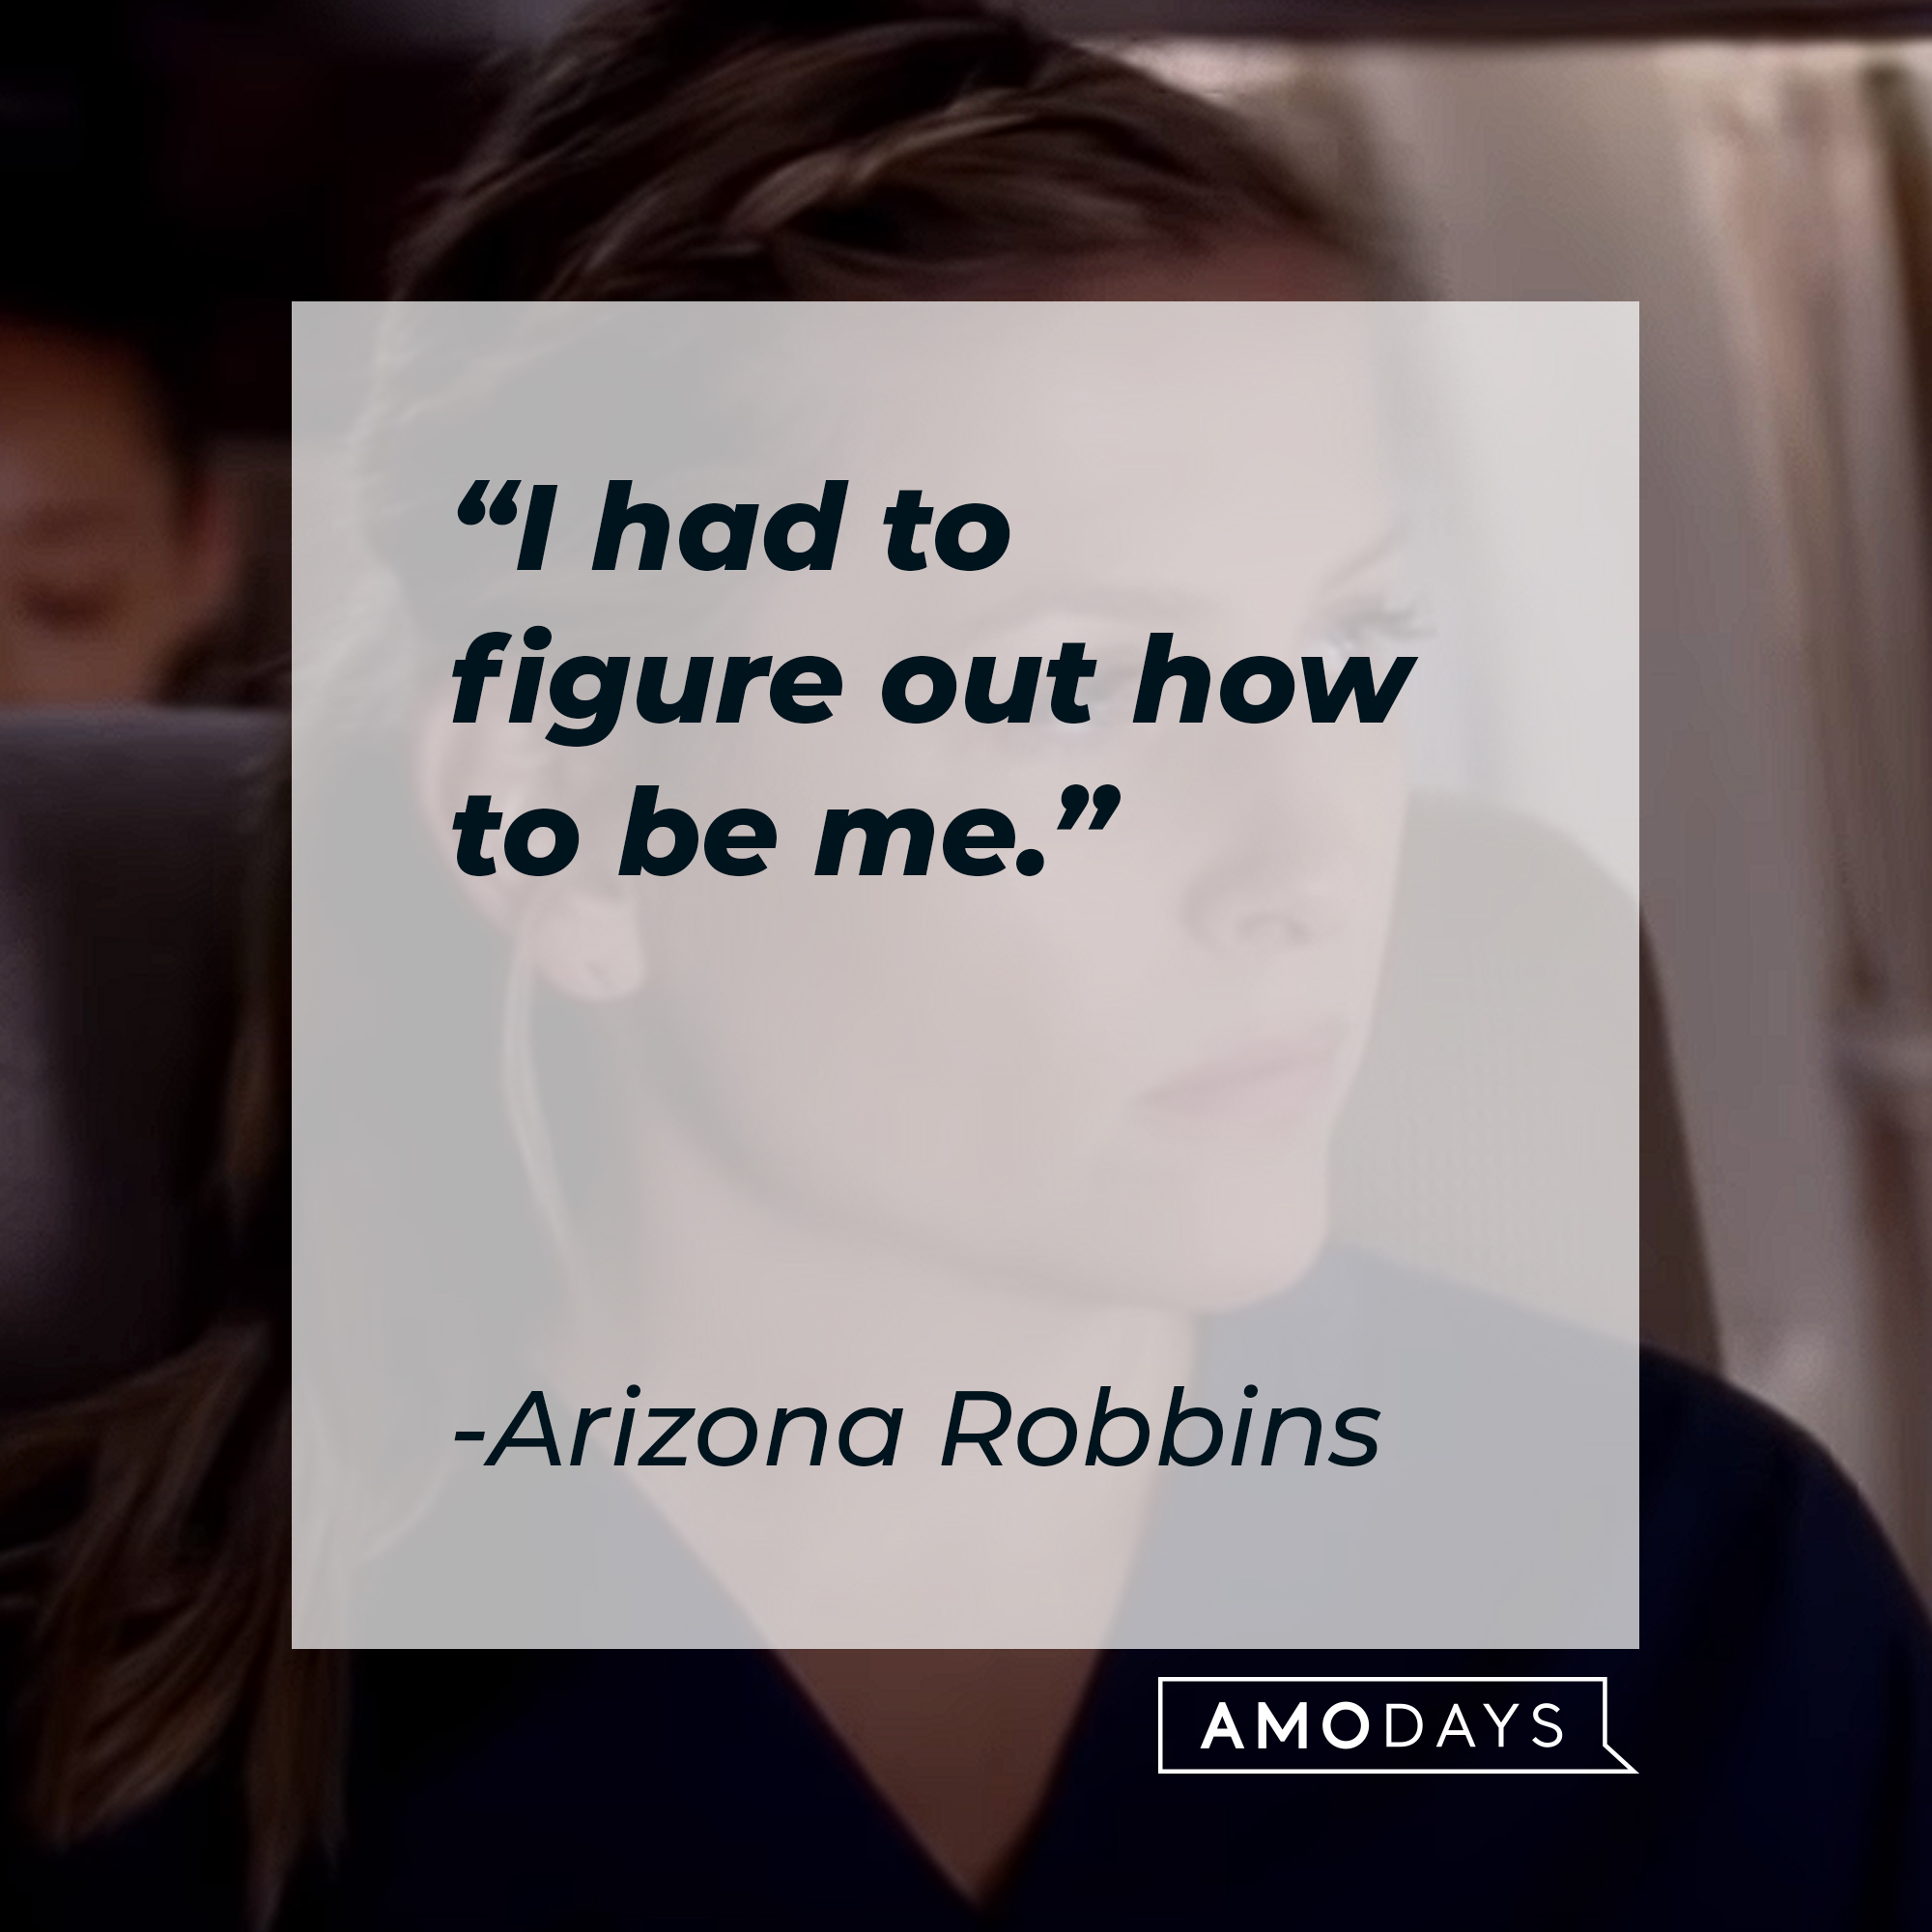 A picture of Arizona Robbins with her quote: "I had to figure out how to be me." | Image: AmoDays